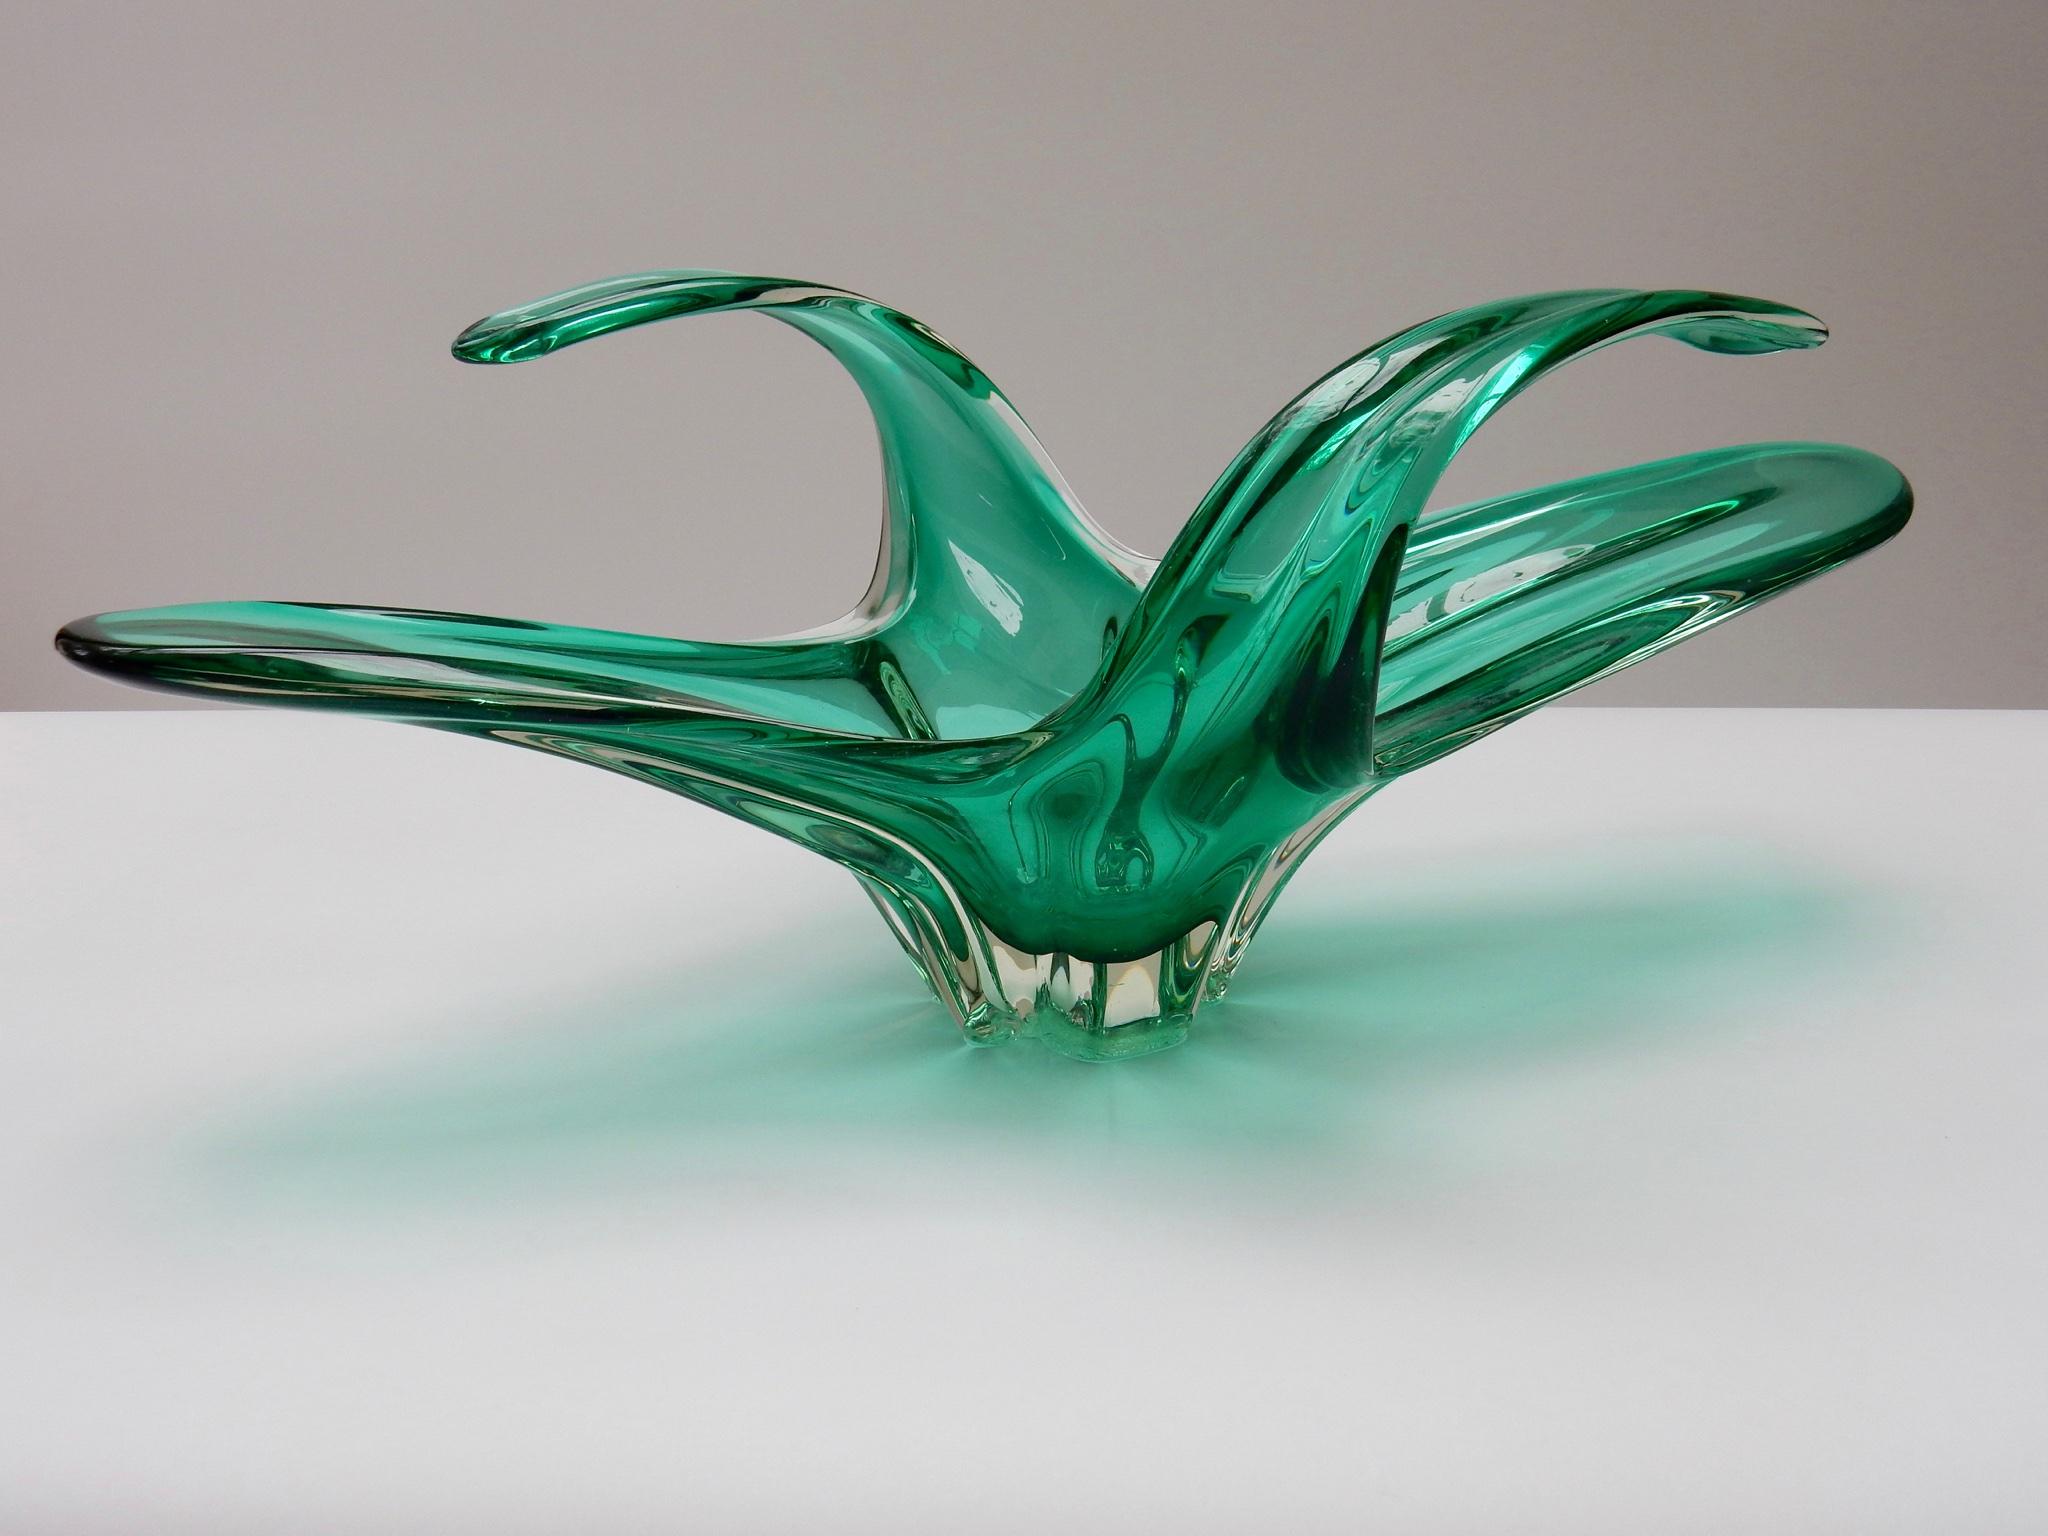 Unique centrepiece in green handblown glass, Belgium 1970s
A unique translucent centrepiece made in Belgium in the 1970s This large scale hand blown glass bowl is of a beautiful green colour. This unique centrepiece is in perfect original condition.